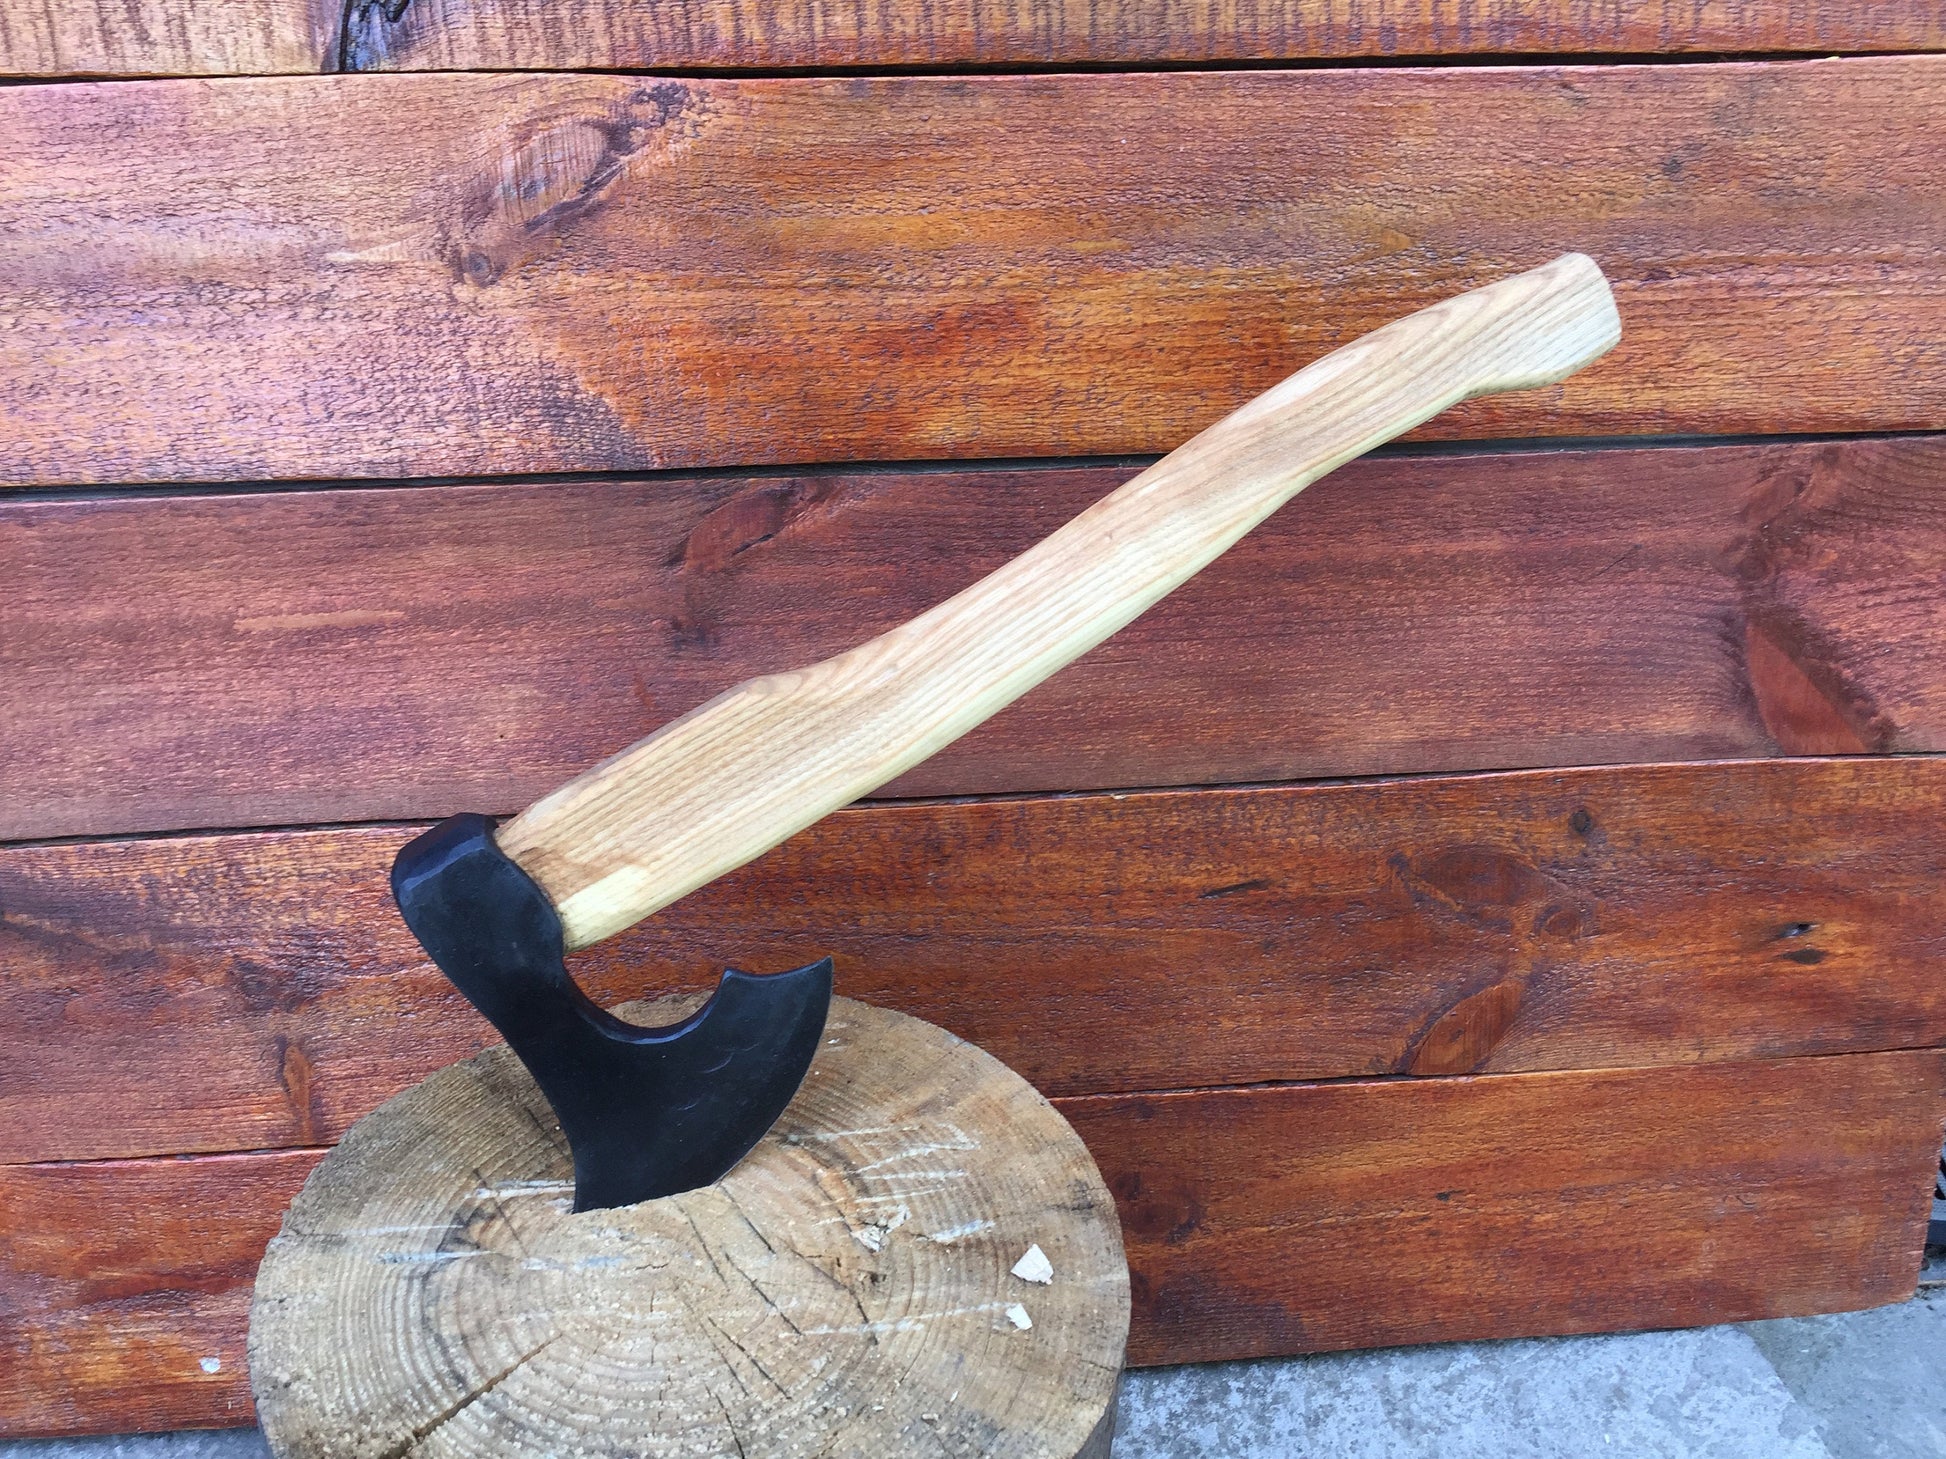 Viking axe, mens gifts, medieval axe, axe, iron gift for him, tomahawk, viking weaponry, viking tools, best man gift, viking gift, camp axe